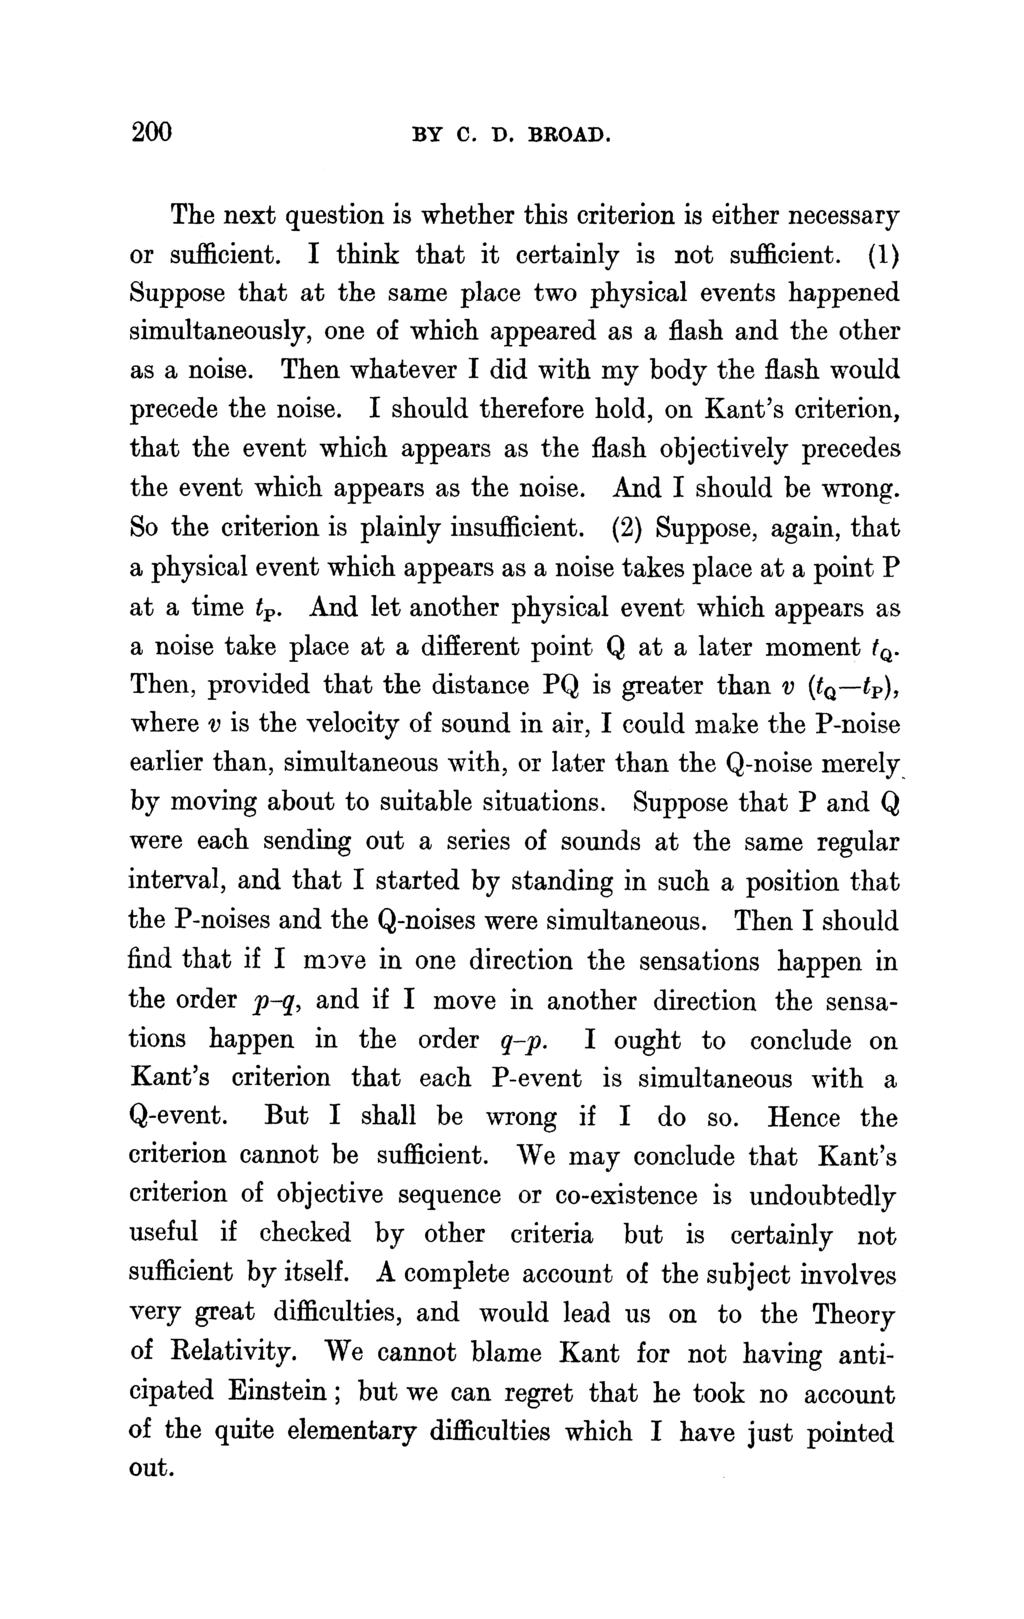 200 BY C. D. BROAD. The next question is whether this criterion is either necessary or sufficient. I think that it certainly is not sufficient.